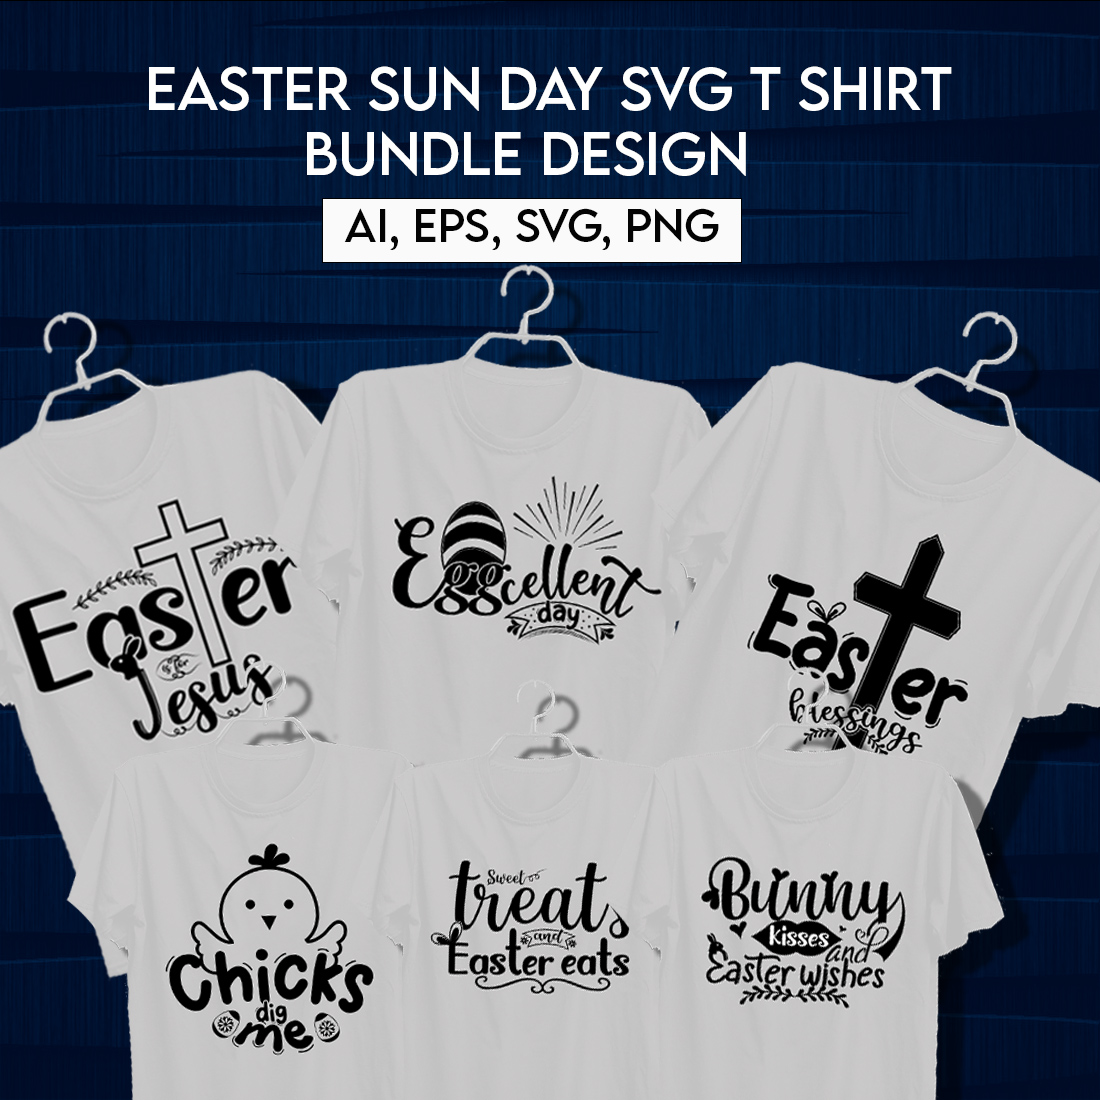 9 Easter Sun Day SVG typography T shirt design bundle cover image.